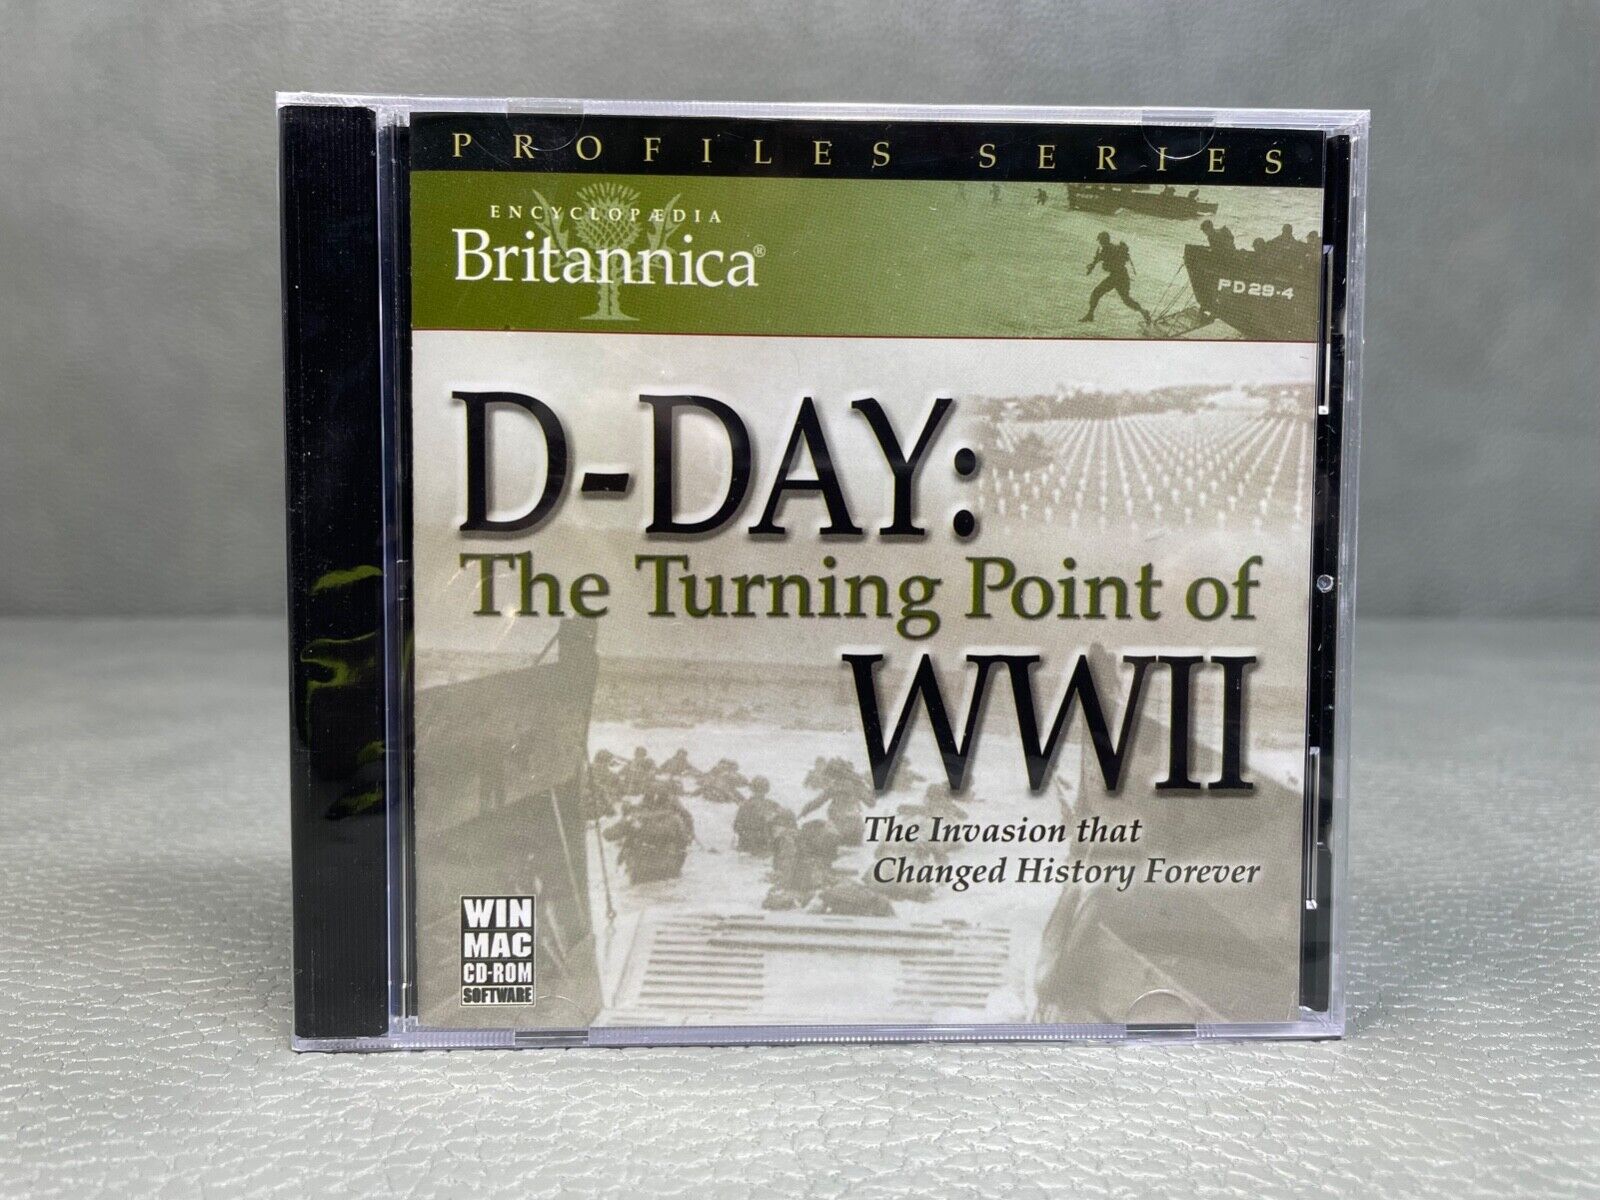 Encyclopedia Britannica D-Day The Turning Point of WW2 CD-Rom